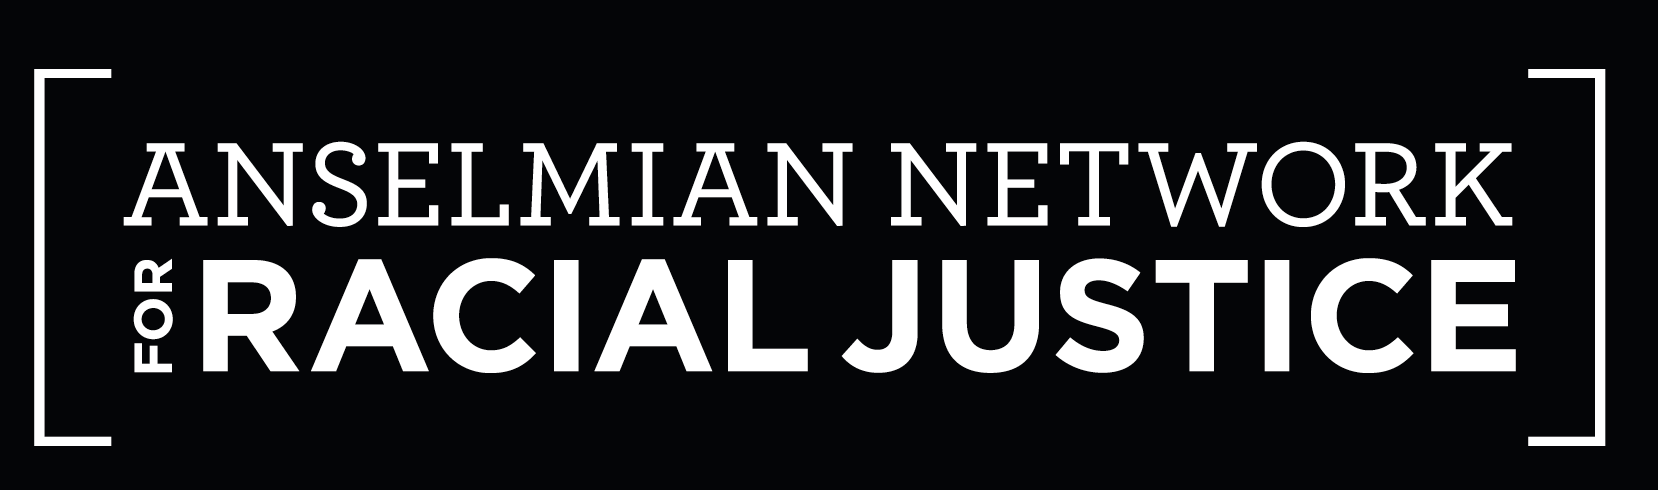 Anselmian Network for Racial Justice logo